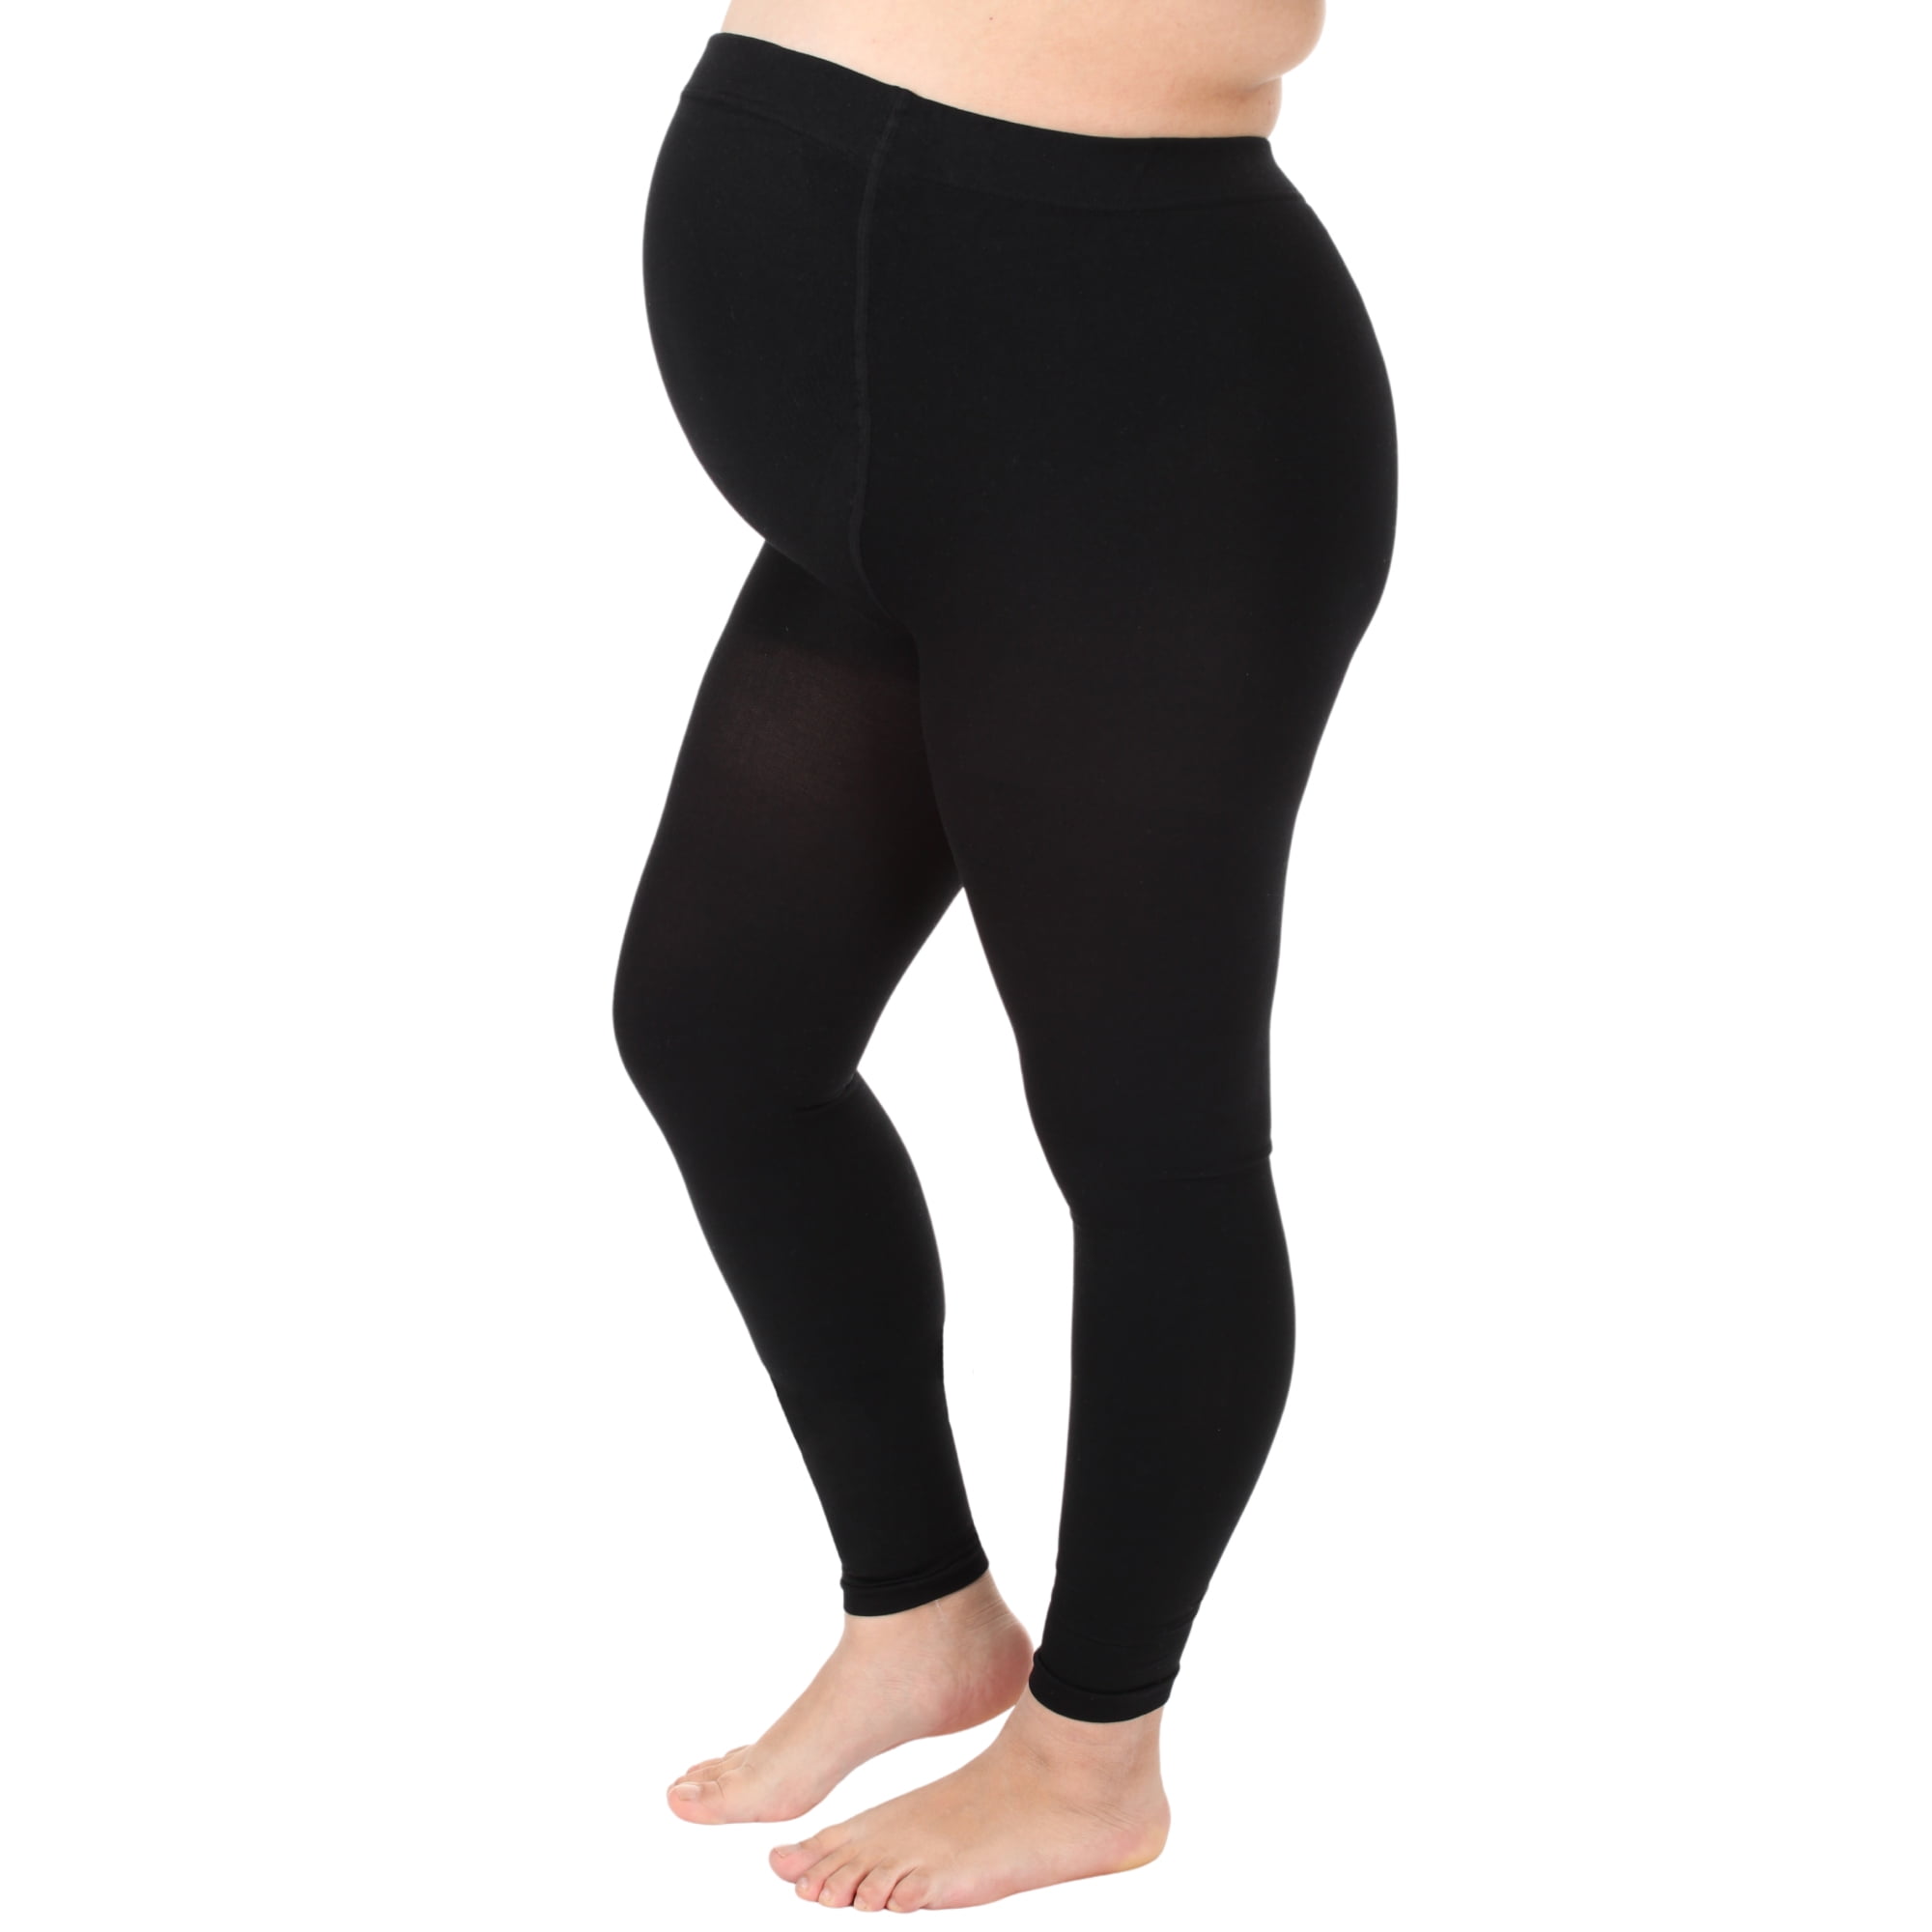 4XL Extra Wide Compression Leggings for Women 20-30mmHg - Navy, 4X-Large 